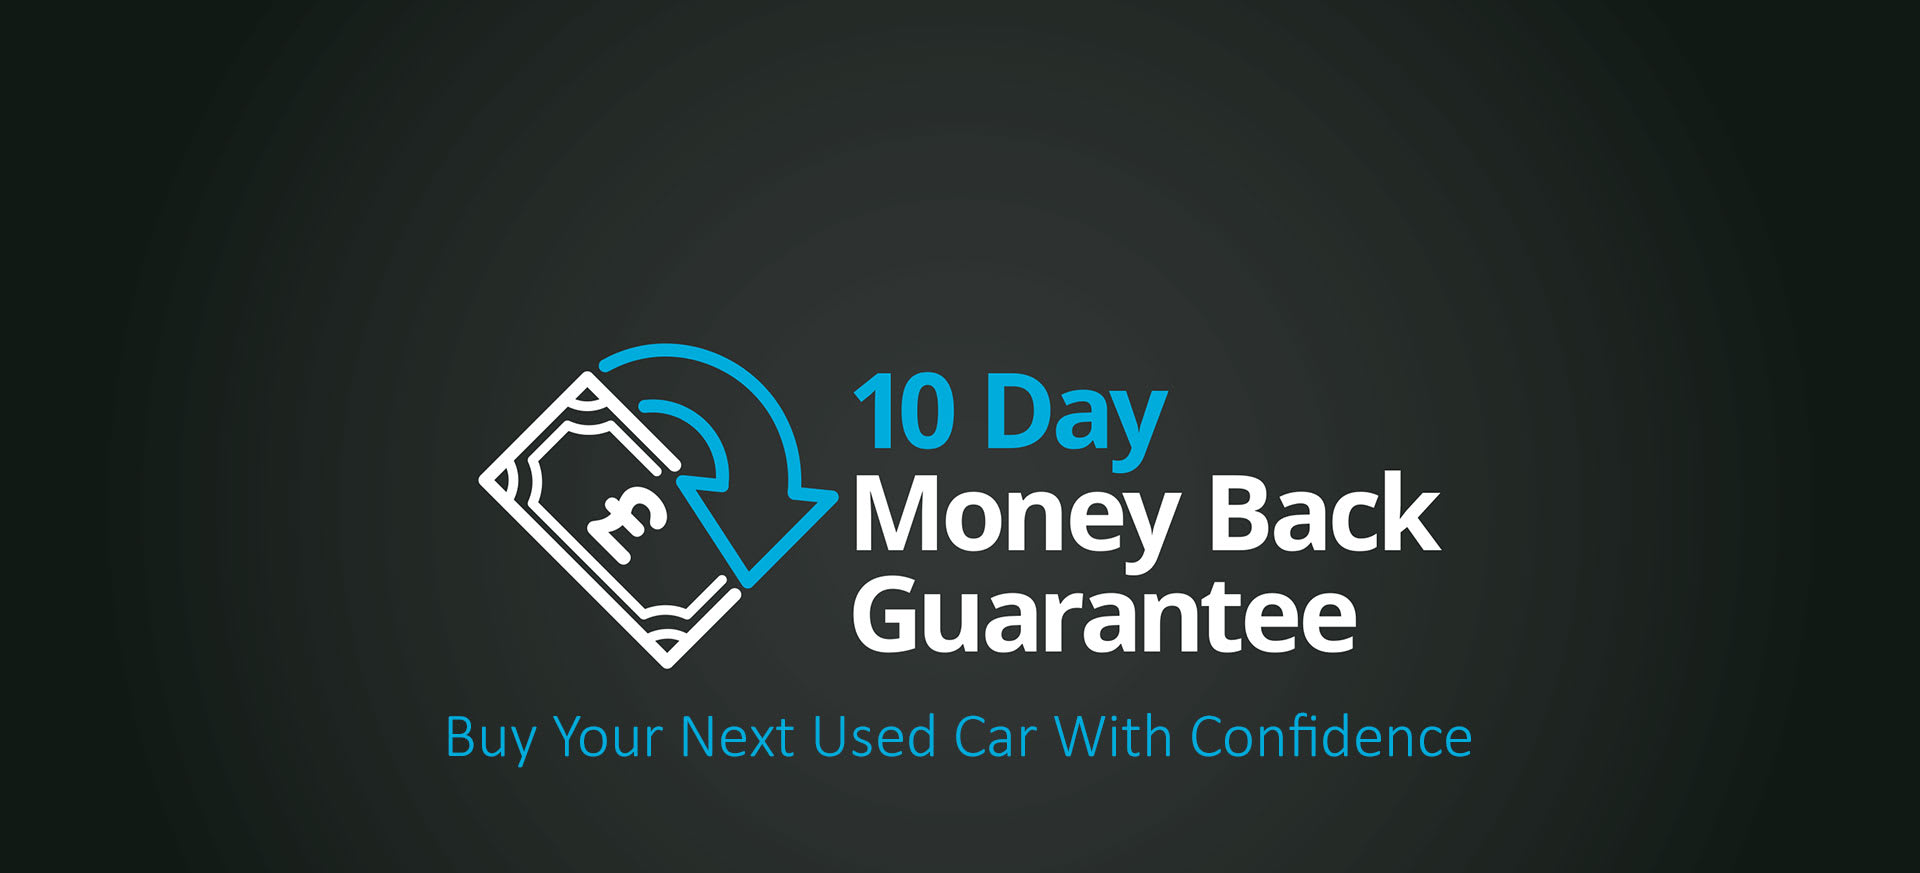 esira Approved Used 10 Day Money Back Guarantee